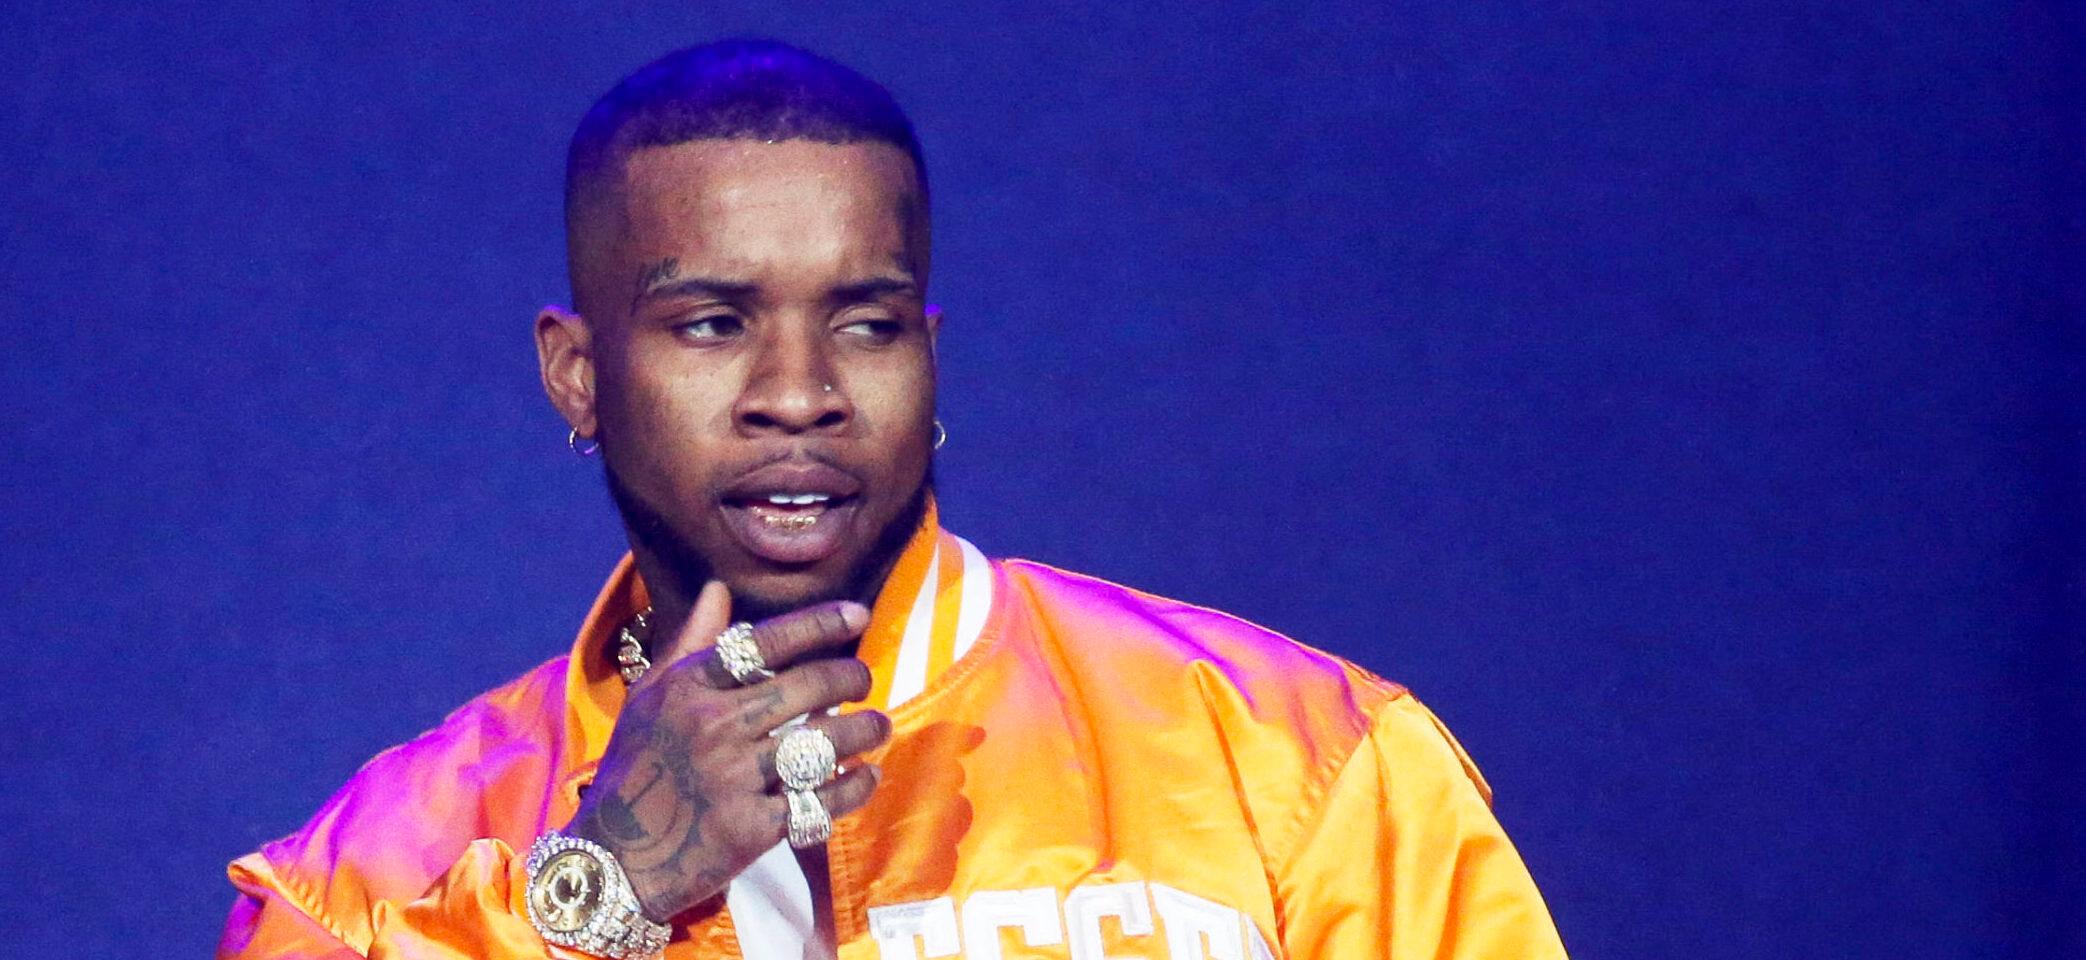 Tory Lanez’s Lawyer Shares Alleged Evidence Of Mistaken Eyewitness ID In Assault Case